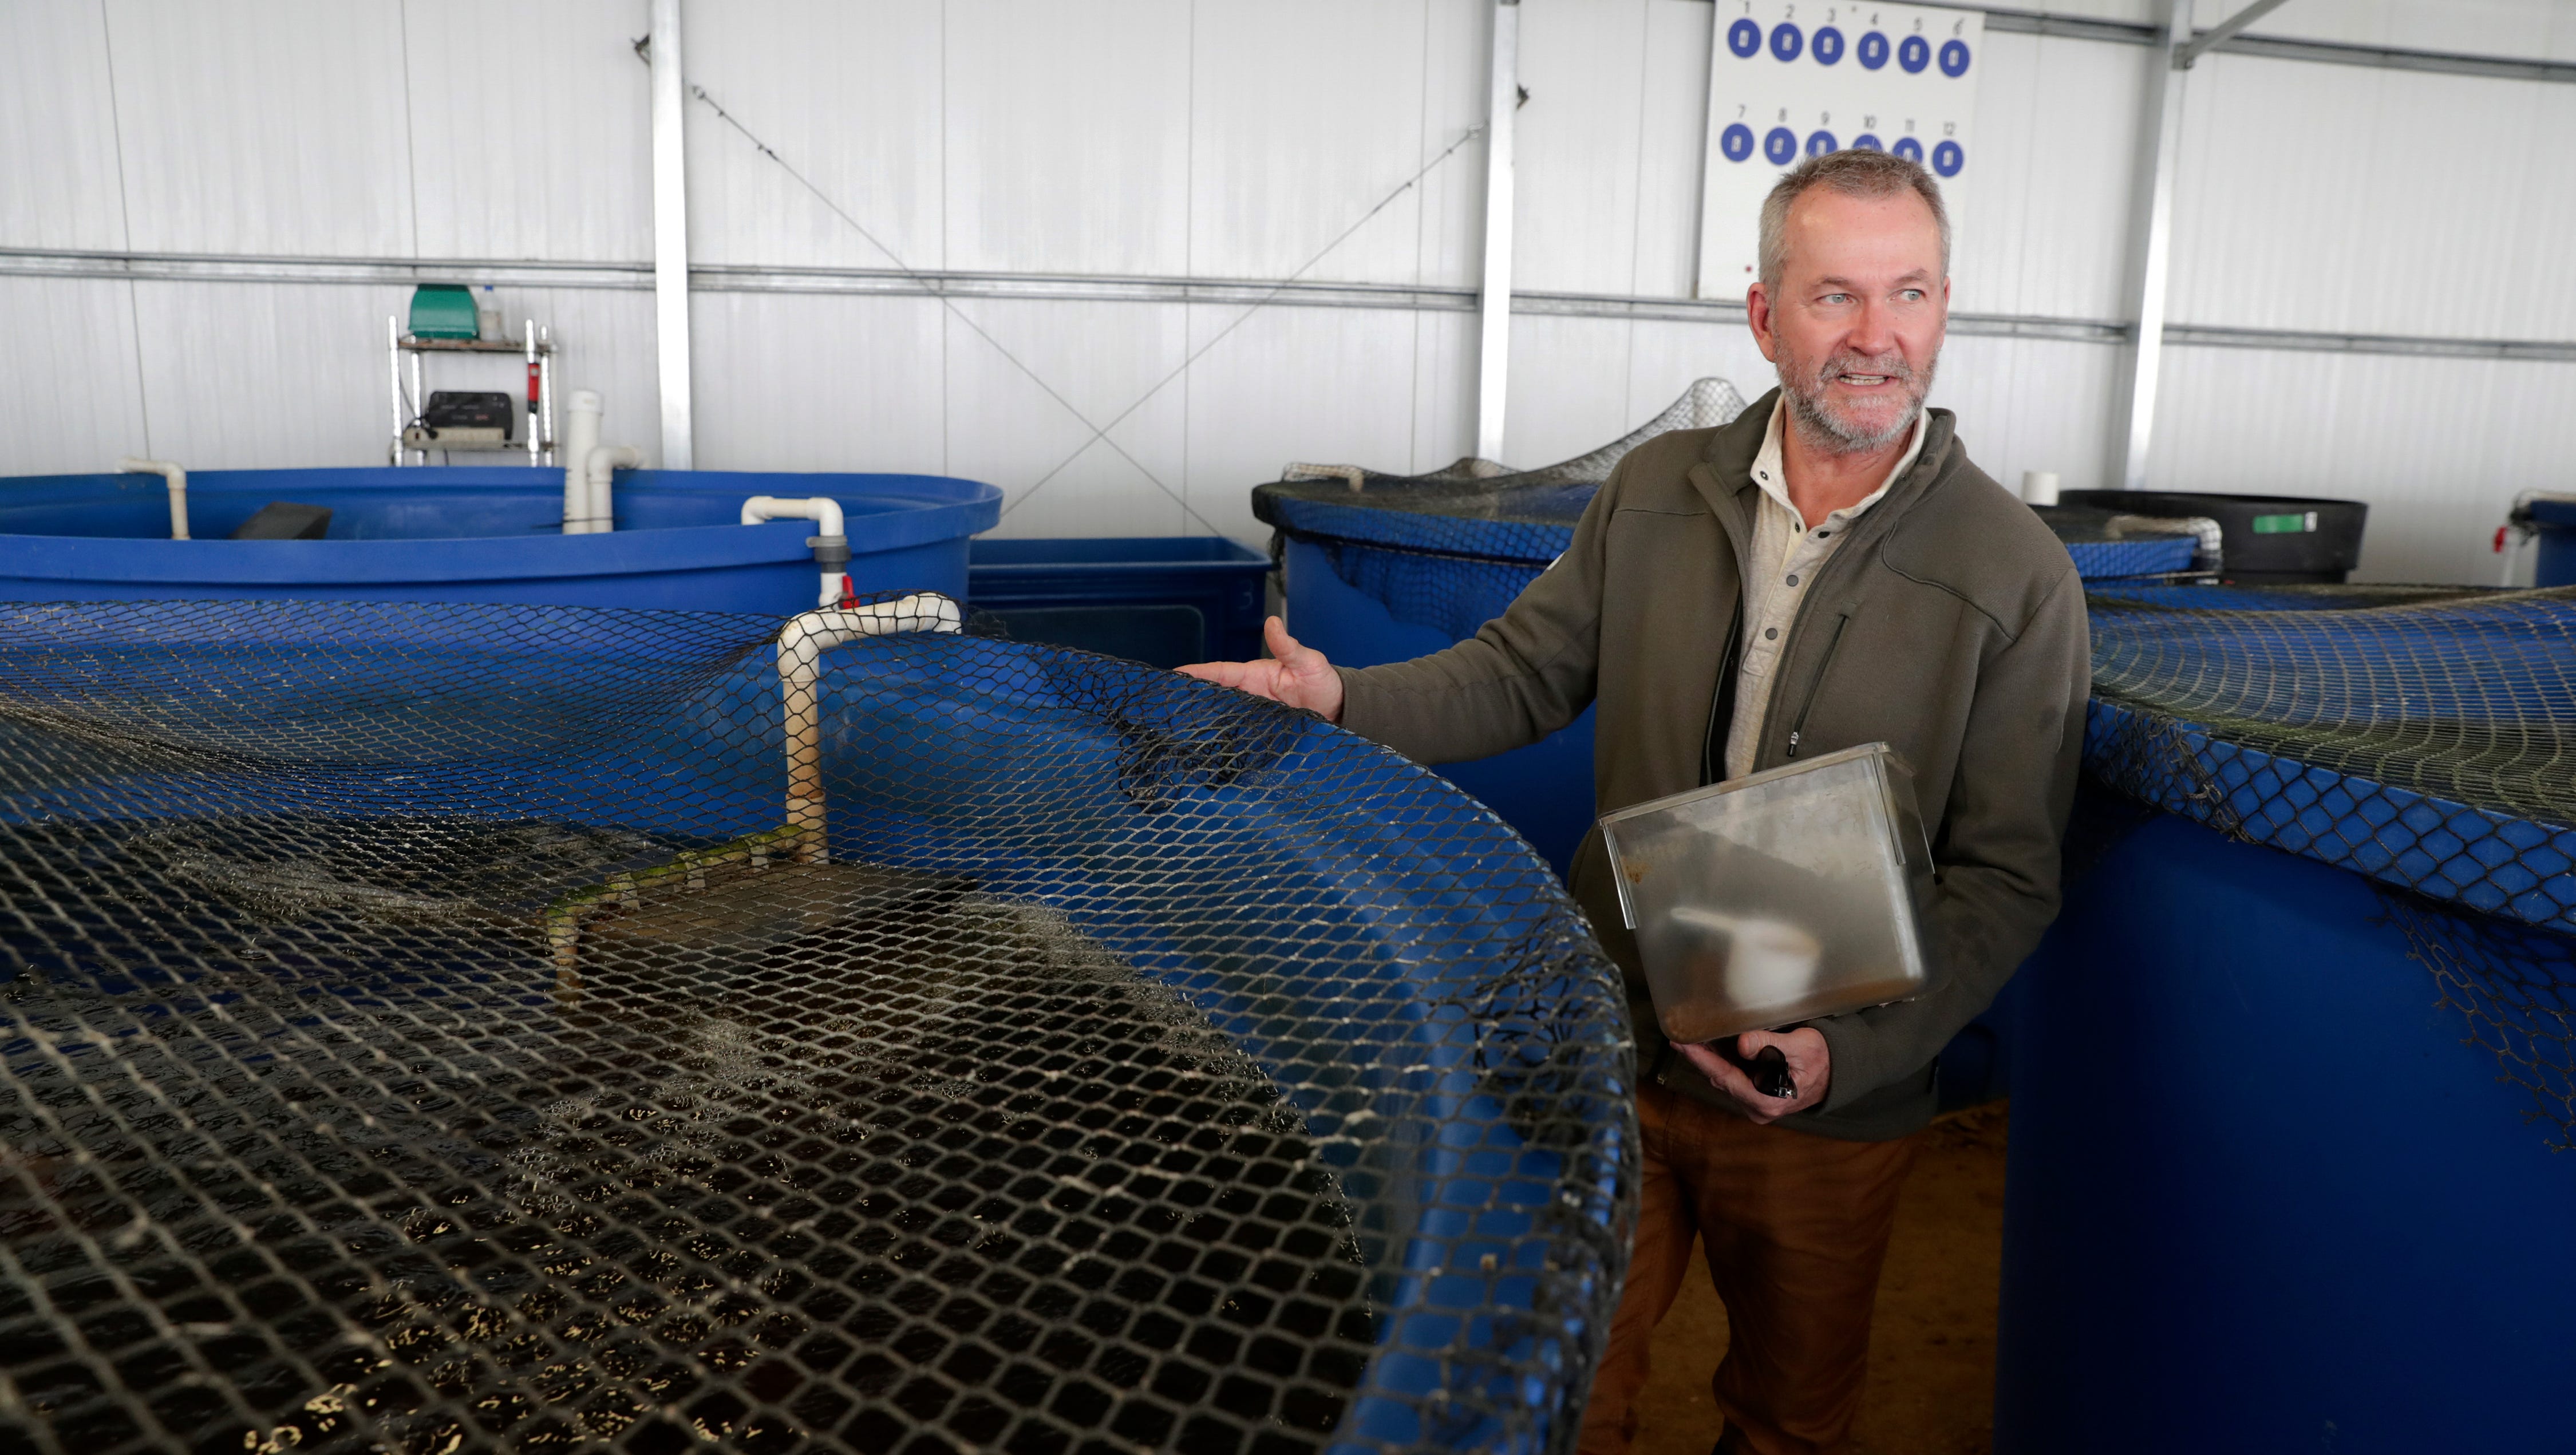 Mike Knight with the tanks of Tilapia. Farming can many forms but for Mike Knight, it includes tilapia and growing fresh vegetables year round all without dirt. Knight's aquaponics farm provides fresh vegetables to local grocery stores and restaurants year round. The farm was photographed Thursday, Feb. 8, 2018.